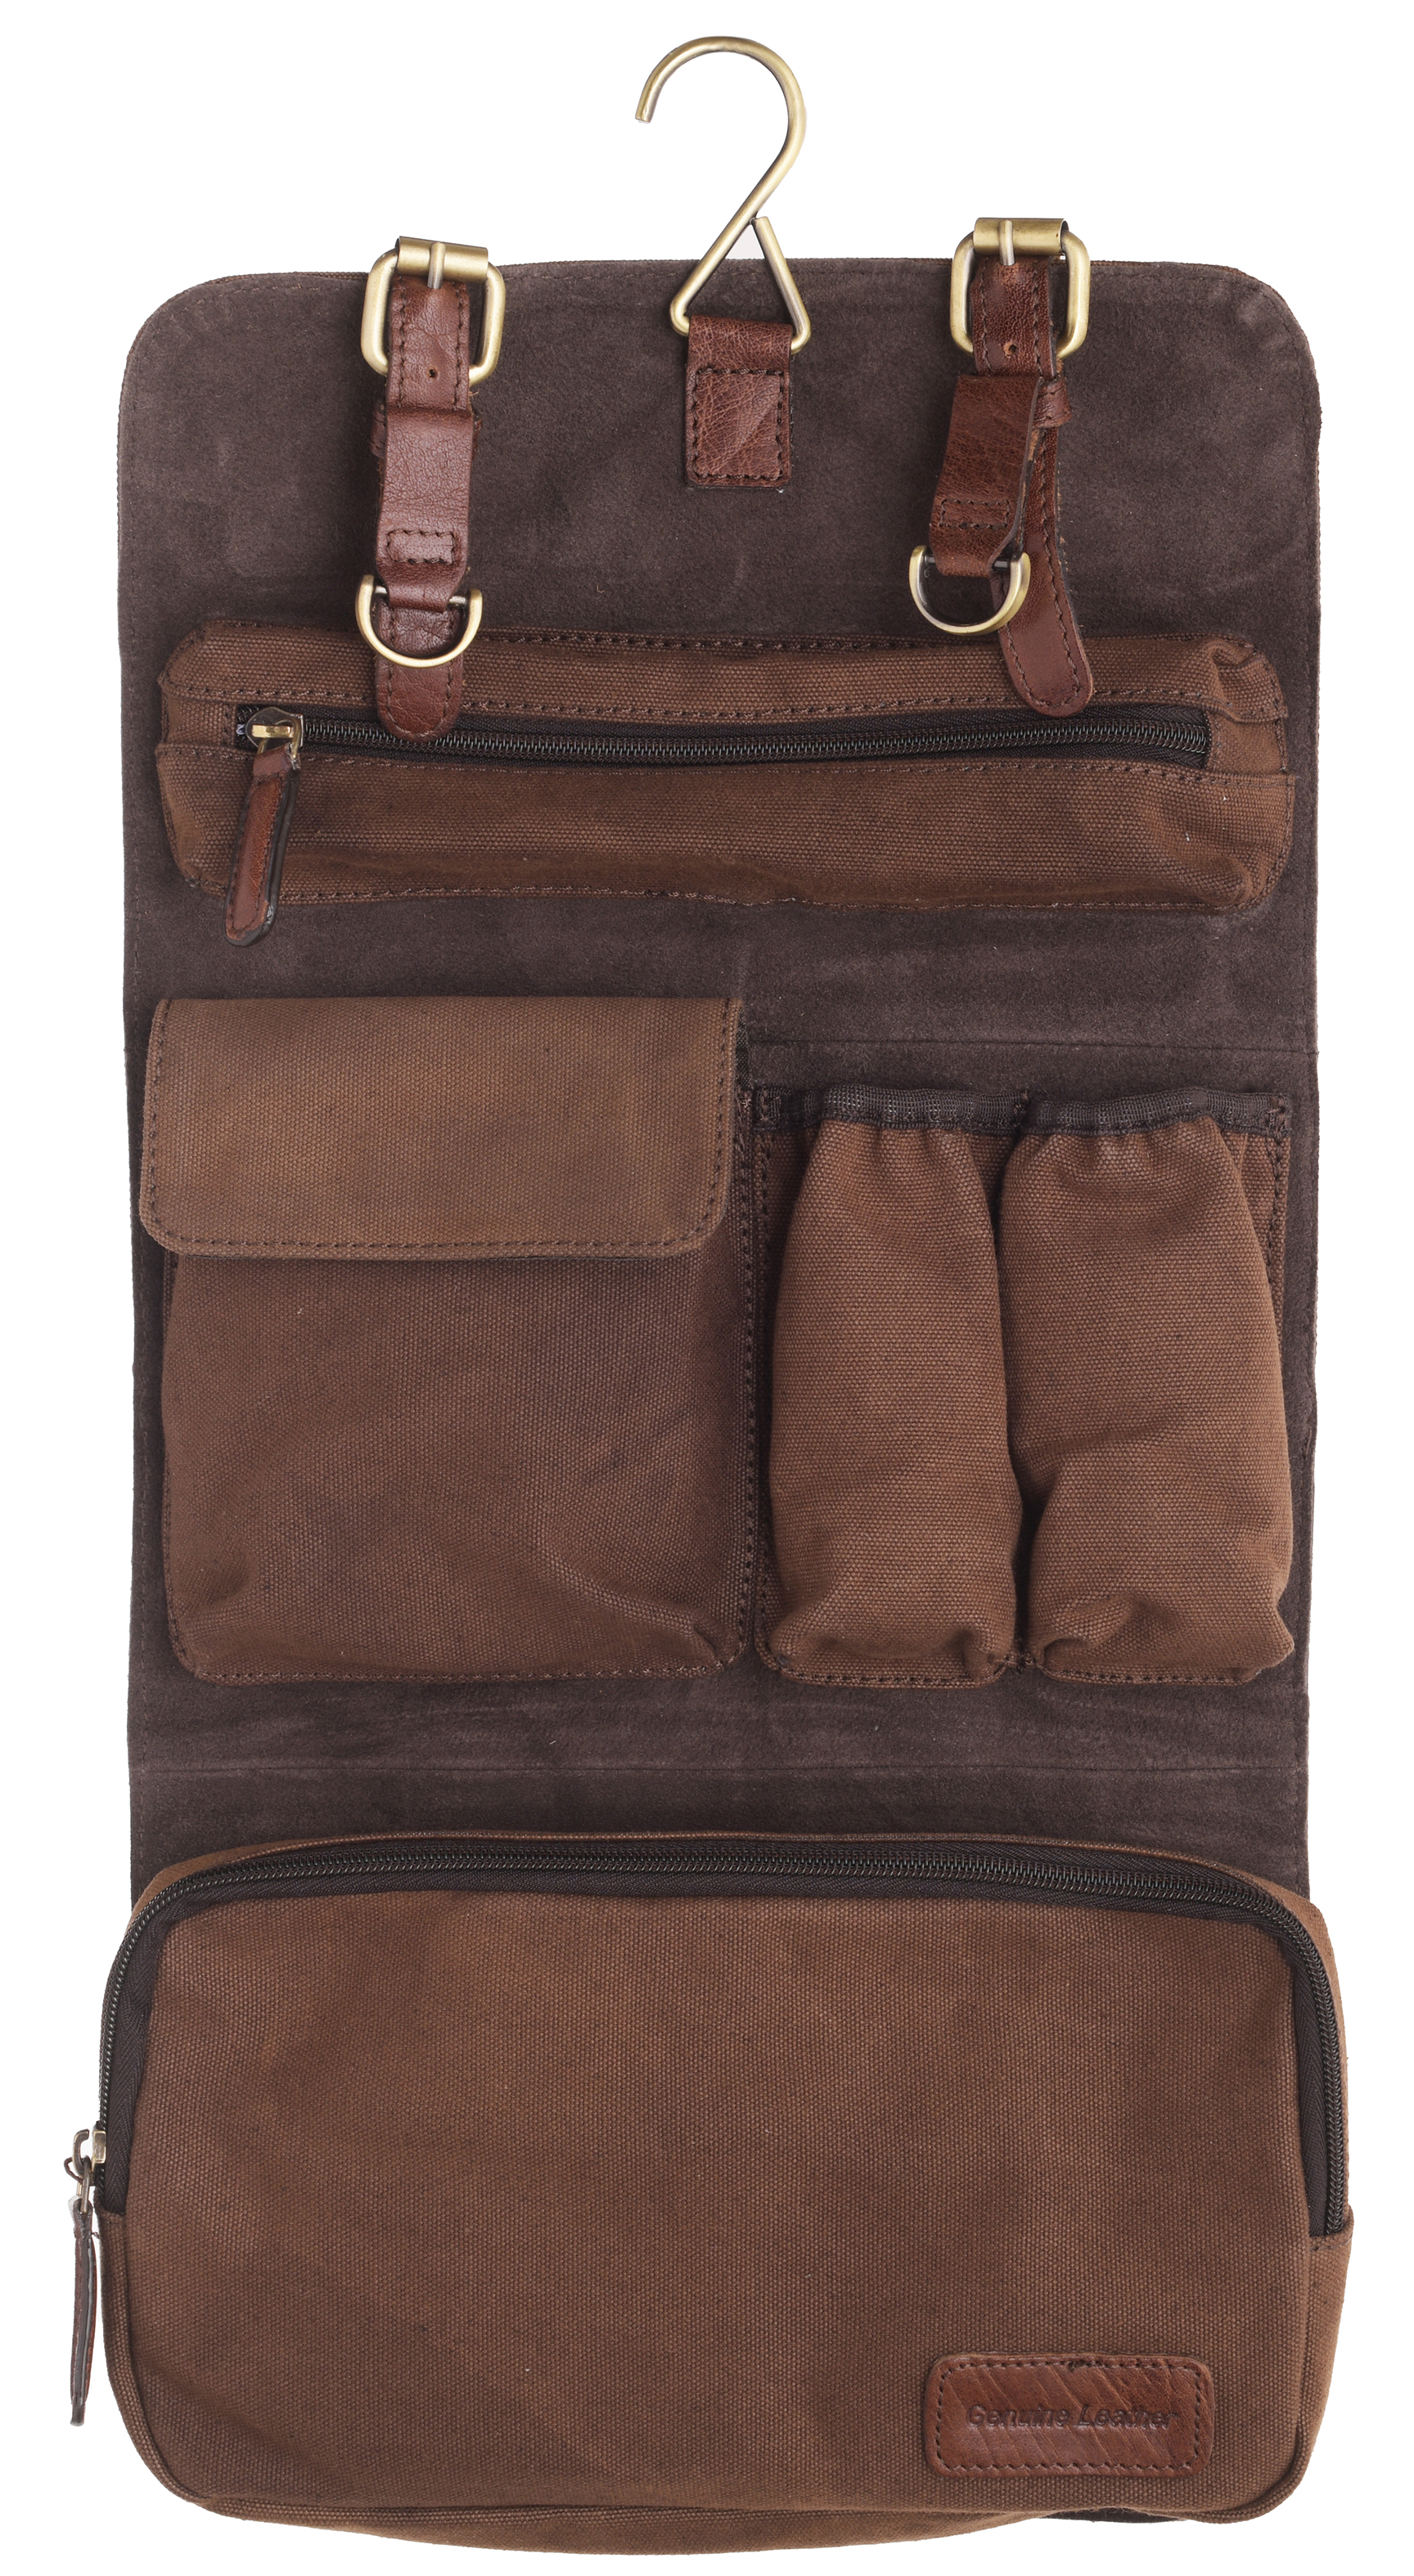 Mens Ladies Soft Leather Canvas Hanging Wash Toiletry Shaving Travel Bag Brown | eBay